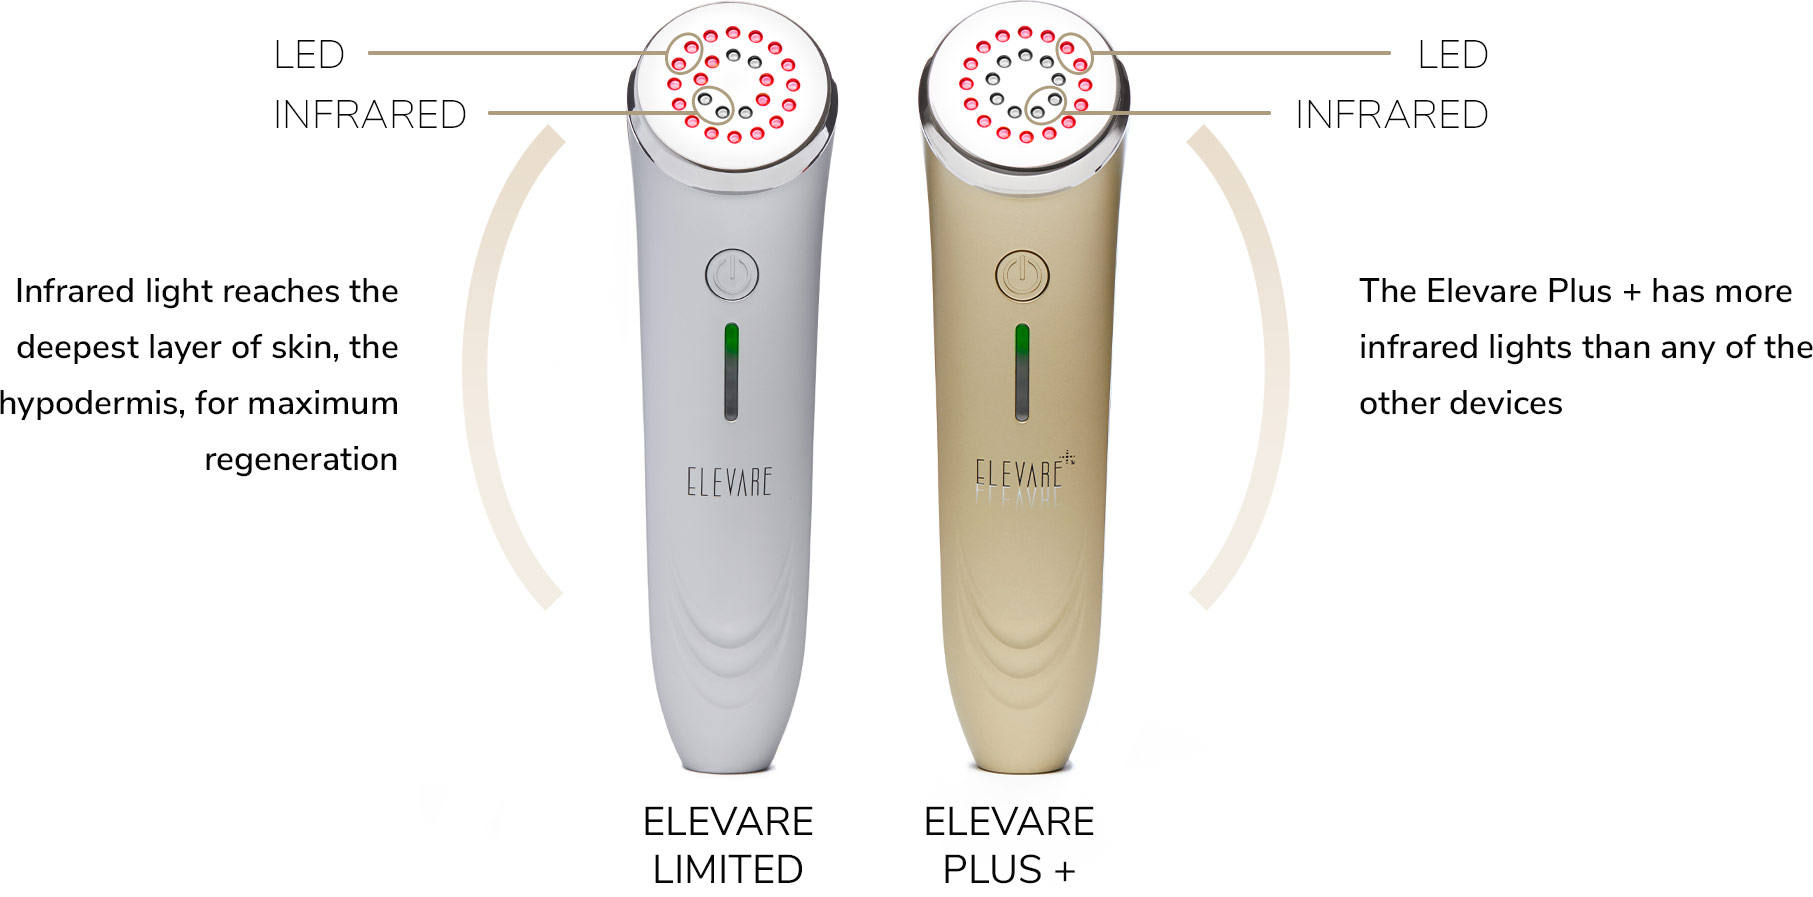 Infrared light reaches the deepest layer of skin, the hypodermis, for maximum regeneration 